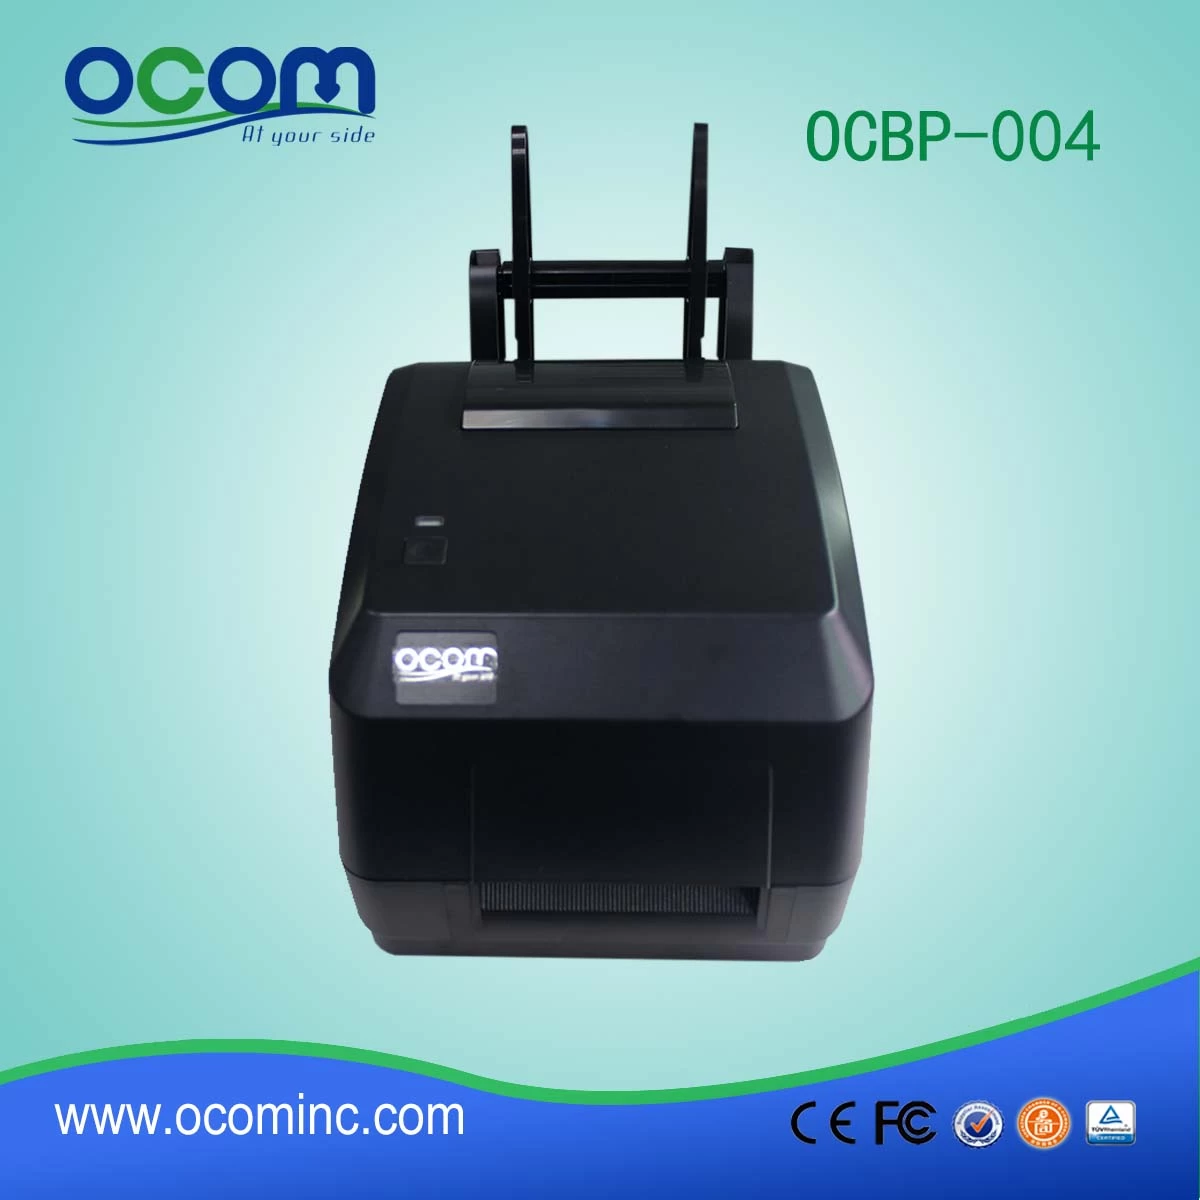 Direct Thermal barcode label printer support transfer